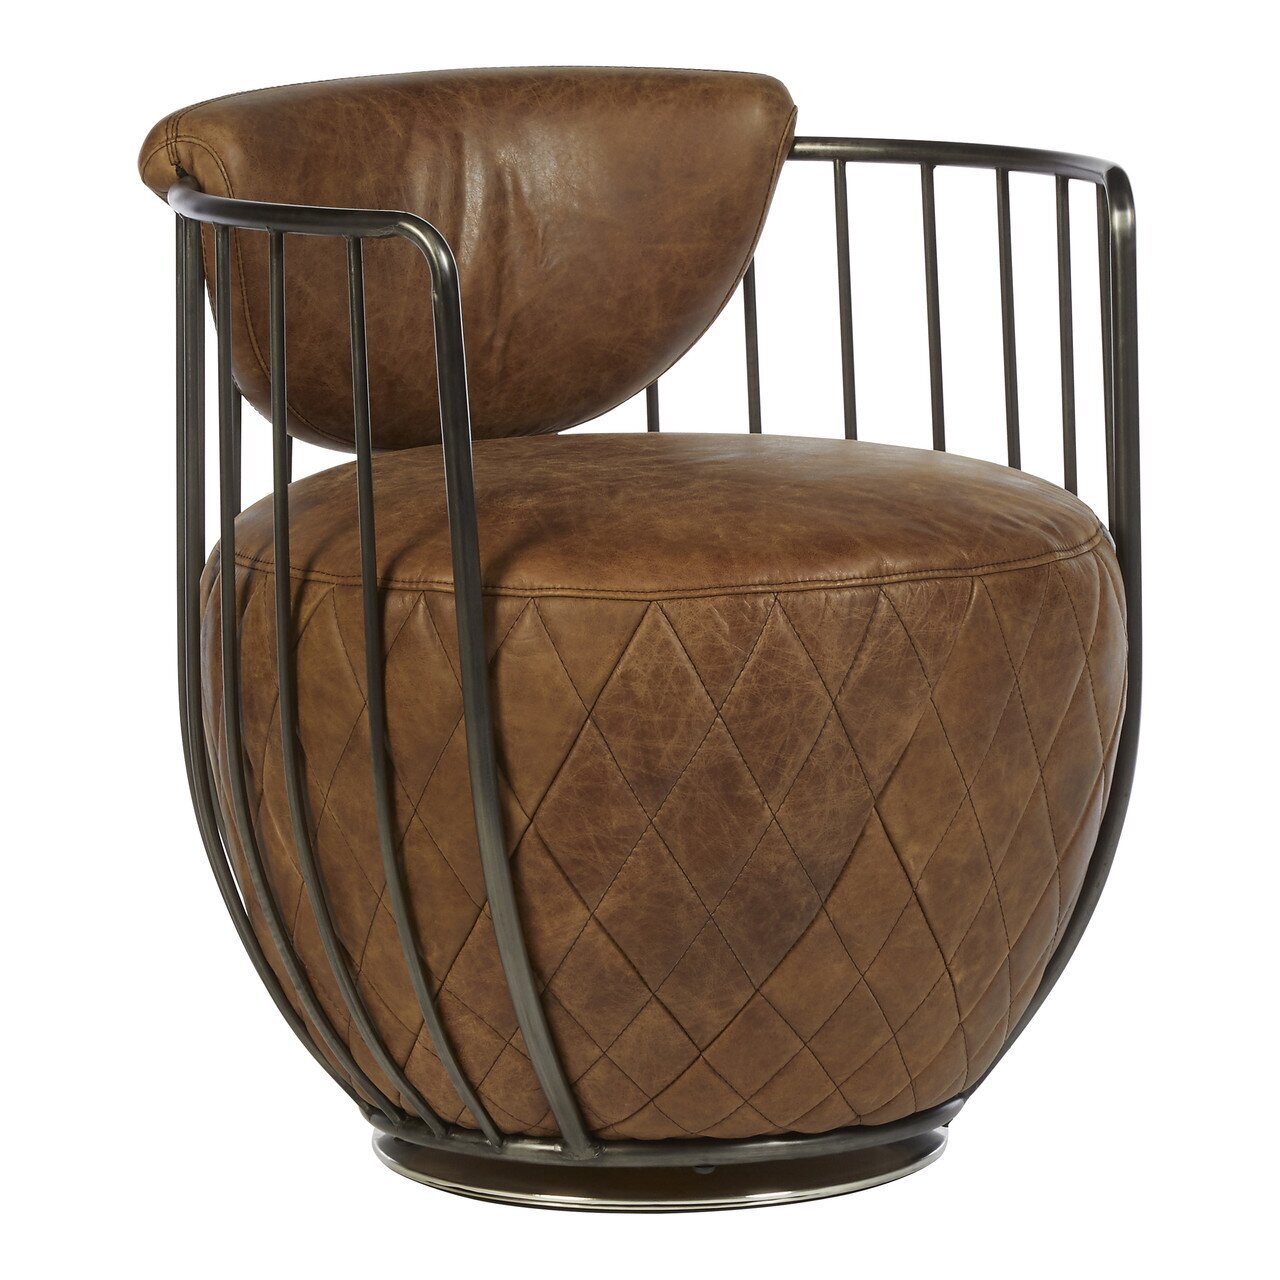 Round chairs for living room in unique designs